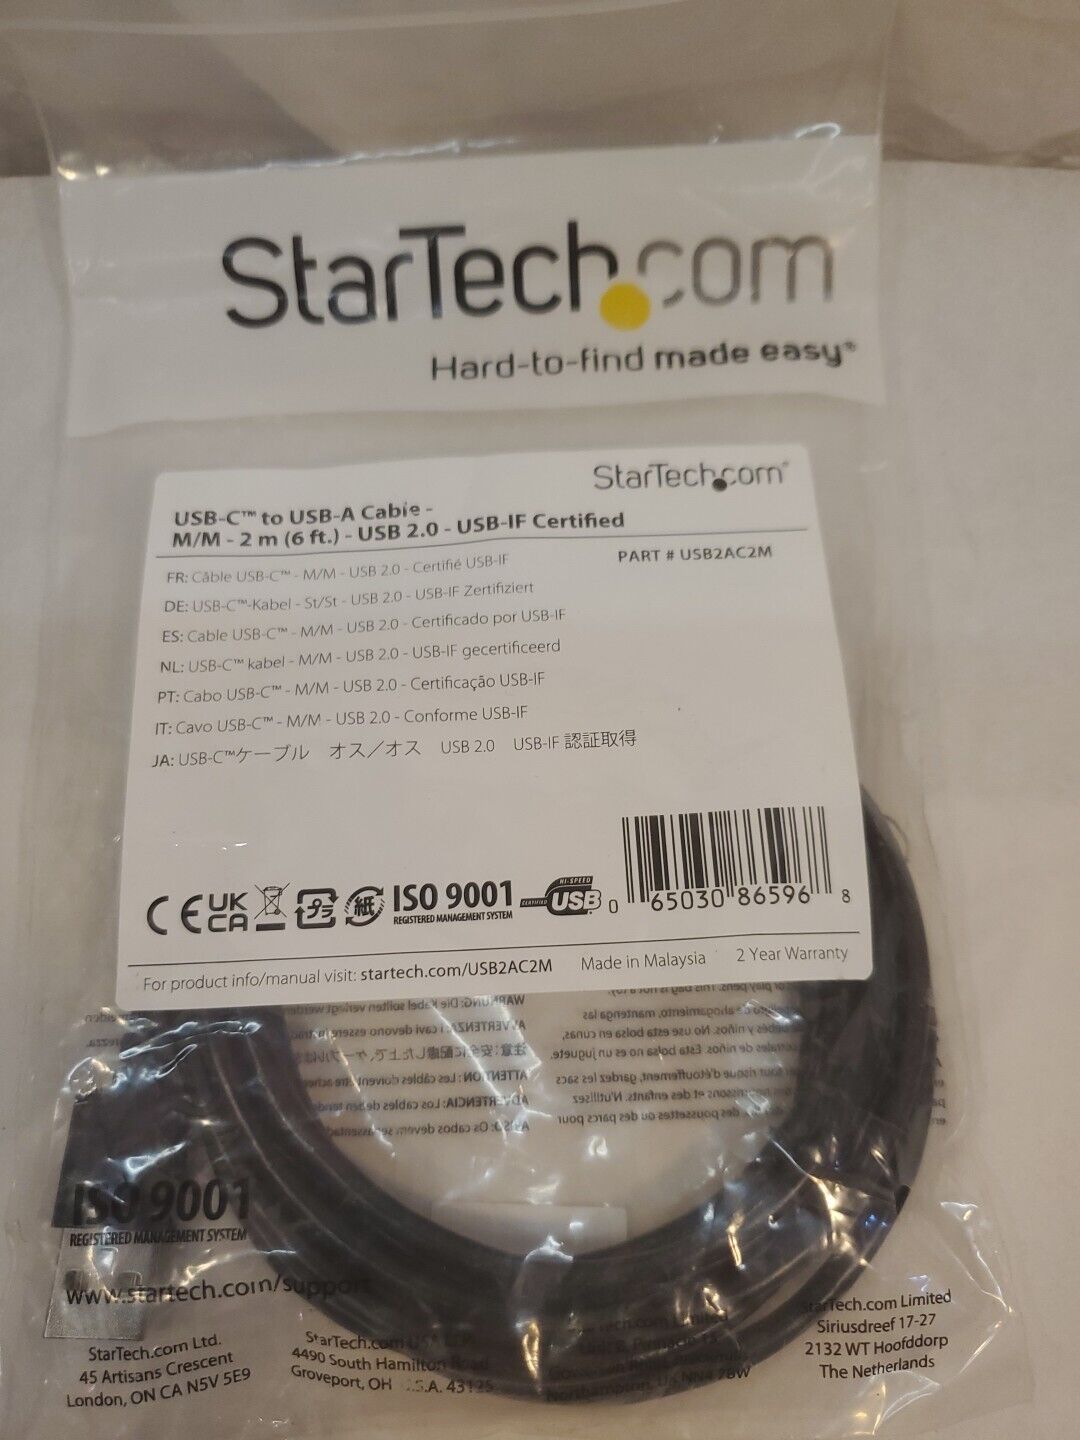 StarTech.com 2m 6 ft USB C to USB A Cable - M/M - USB 2.0 - USB Type-C to A